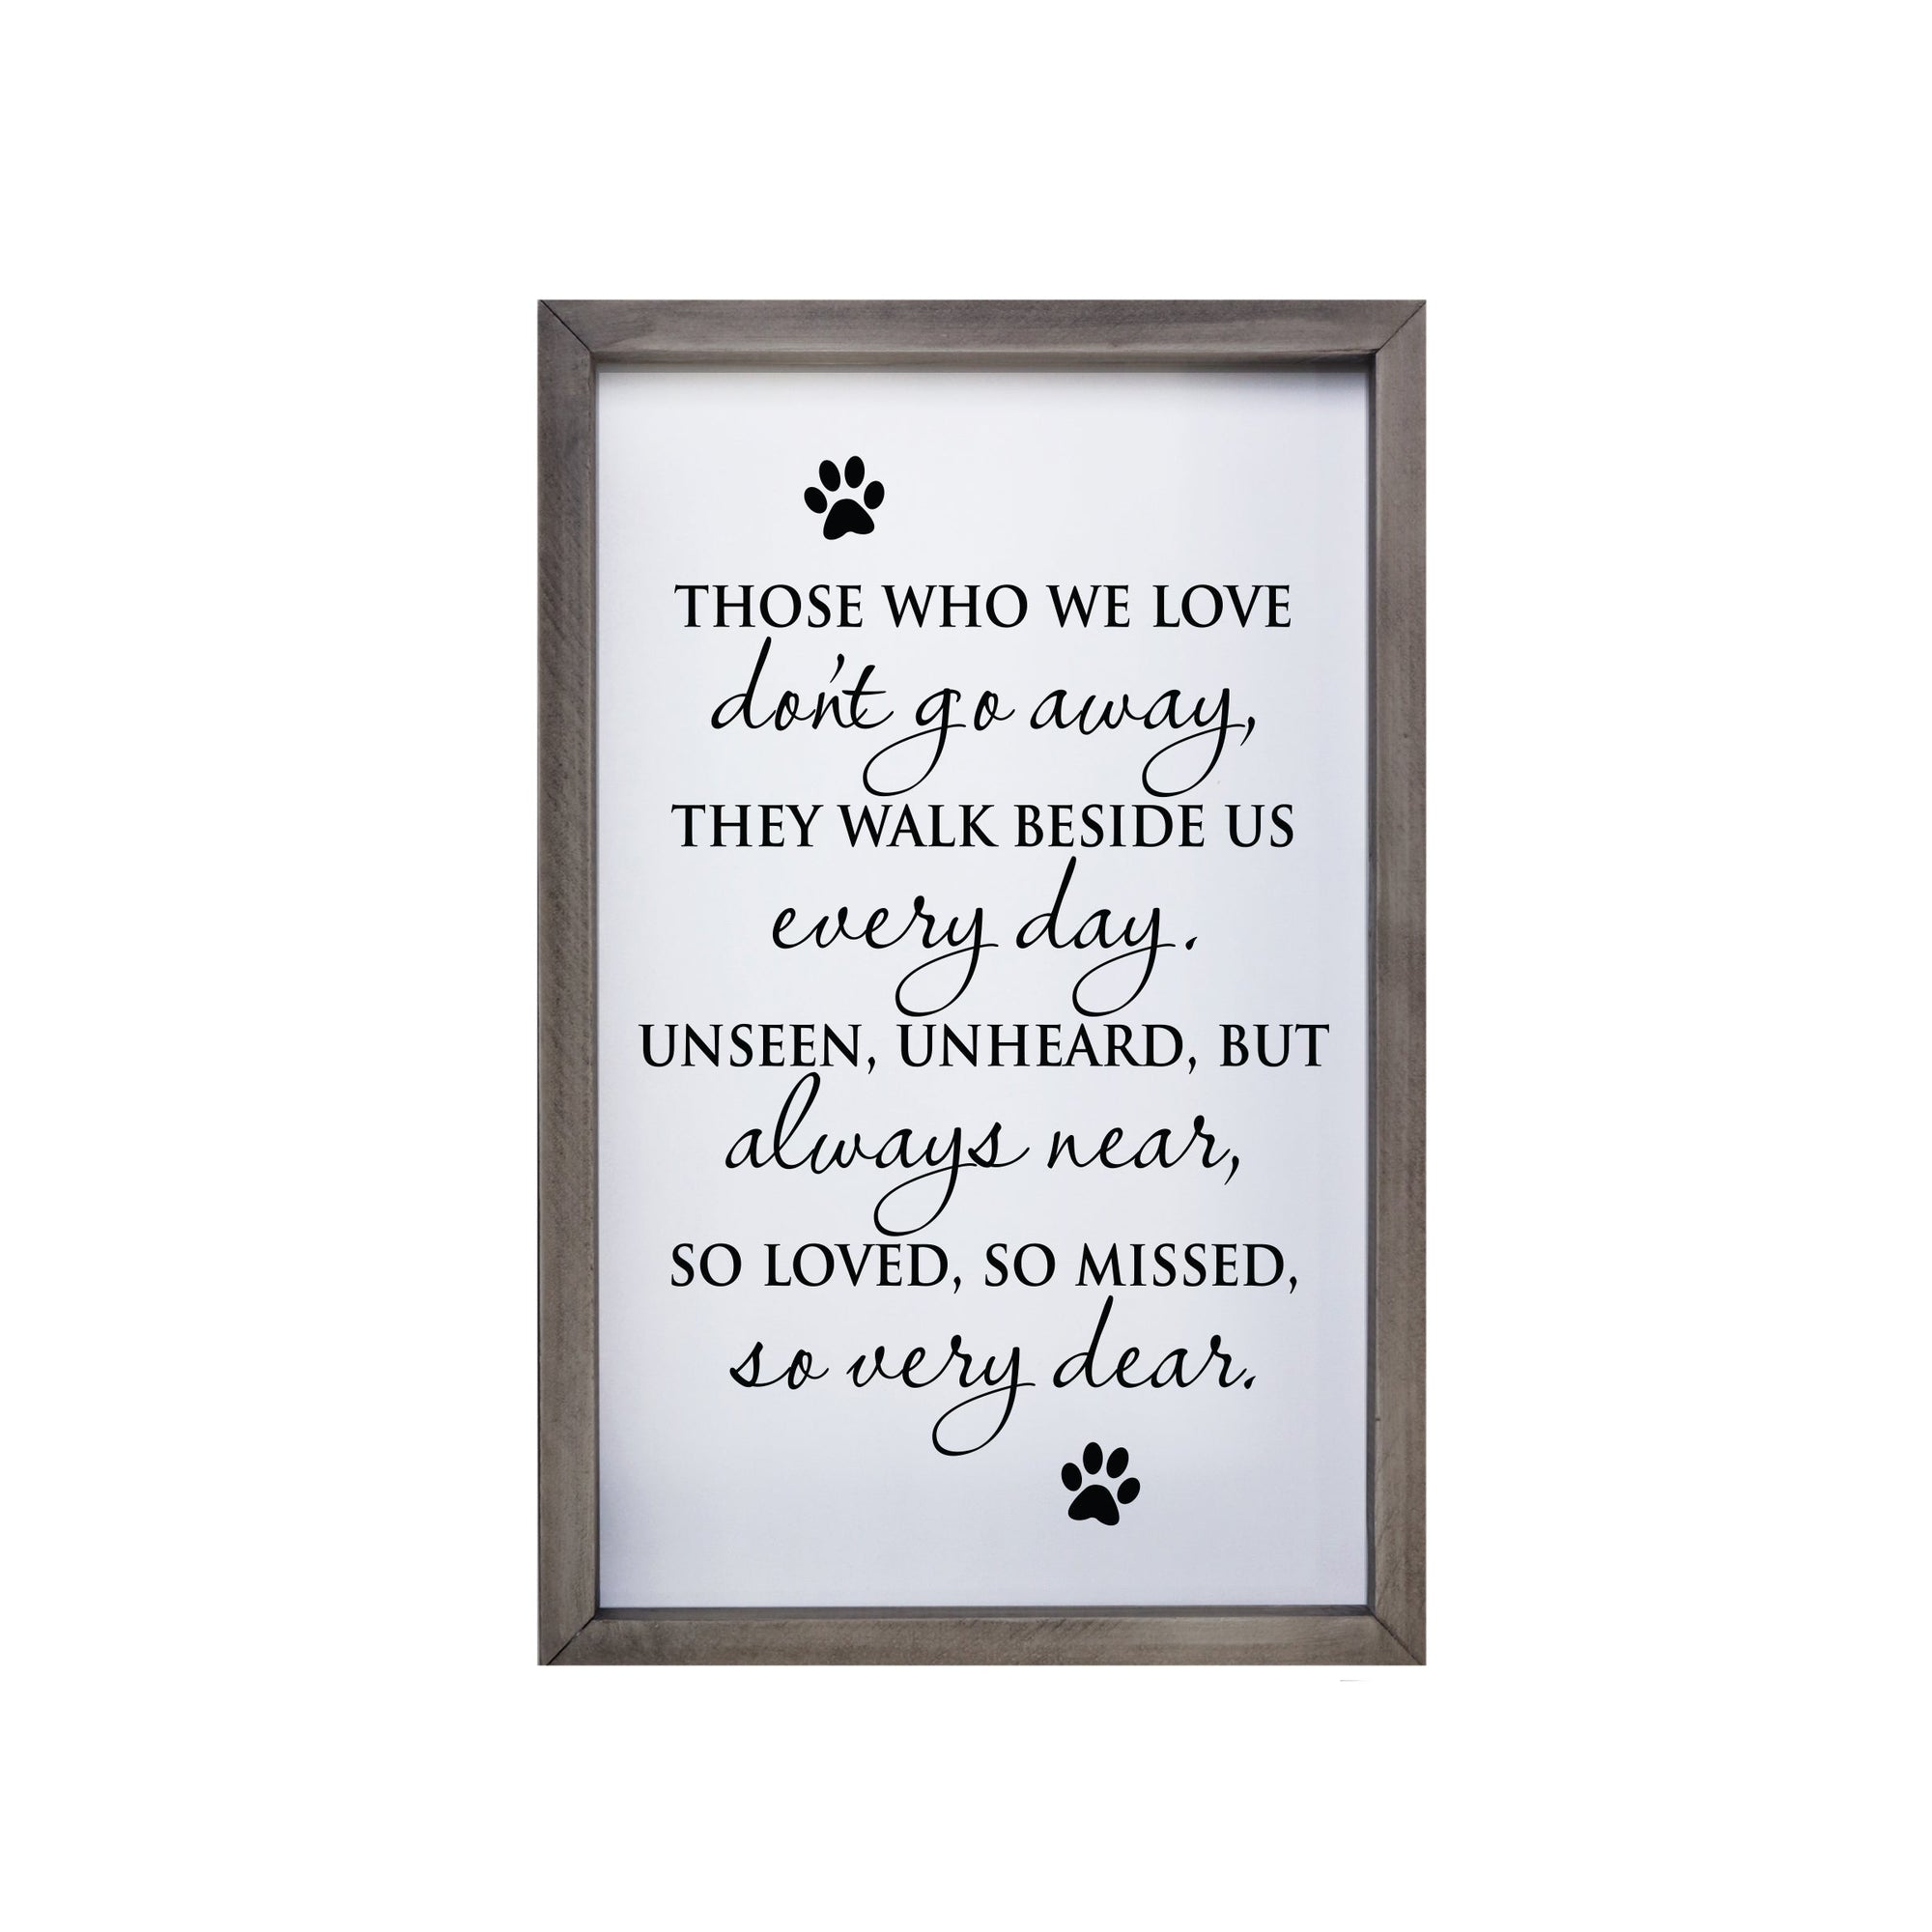 10x7 Grey Framed Pet Memorial Shadow Box with phrase "Those Who We Love Don't Go Away"